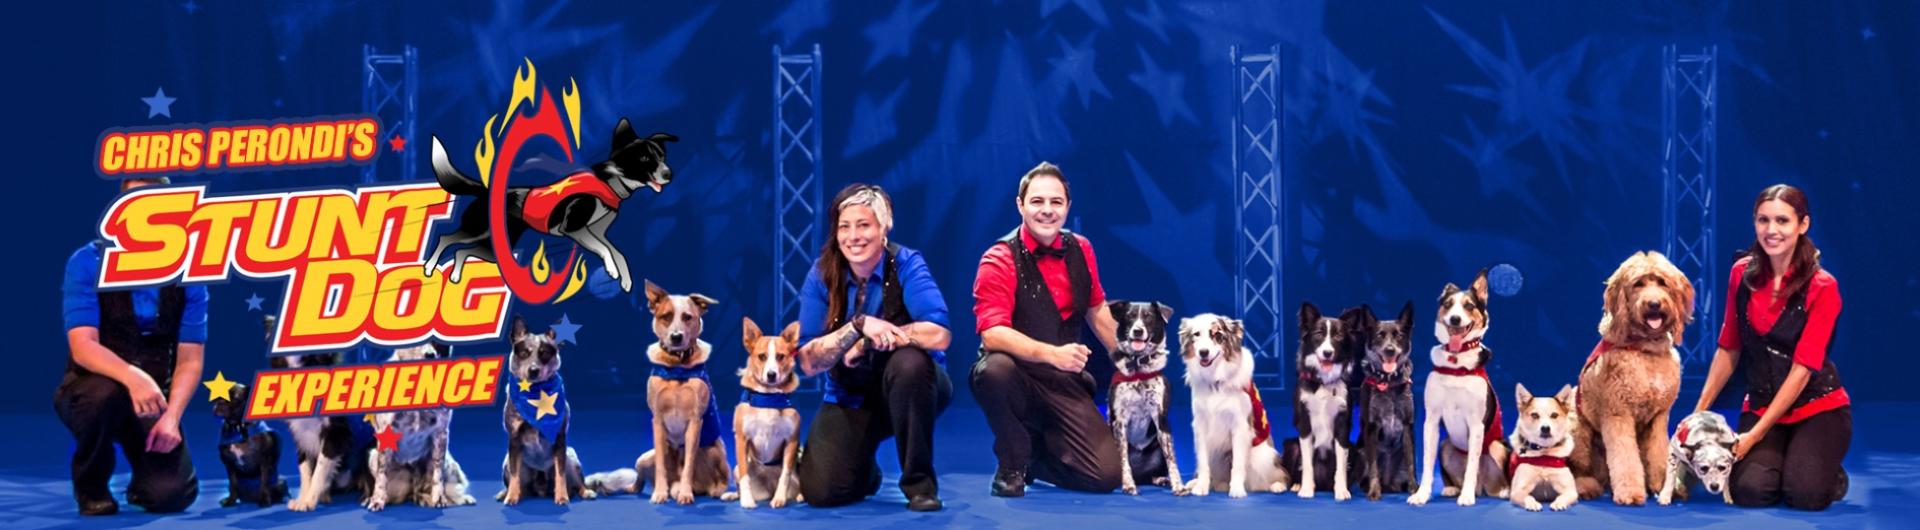 The trainers and dogs of the show lined up and posing on stage.